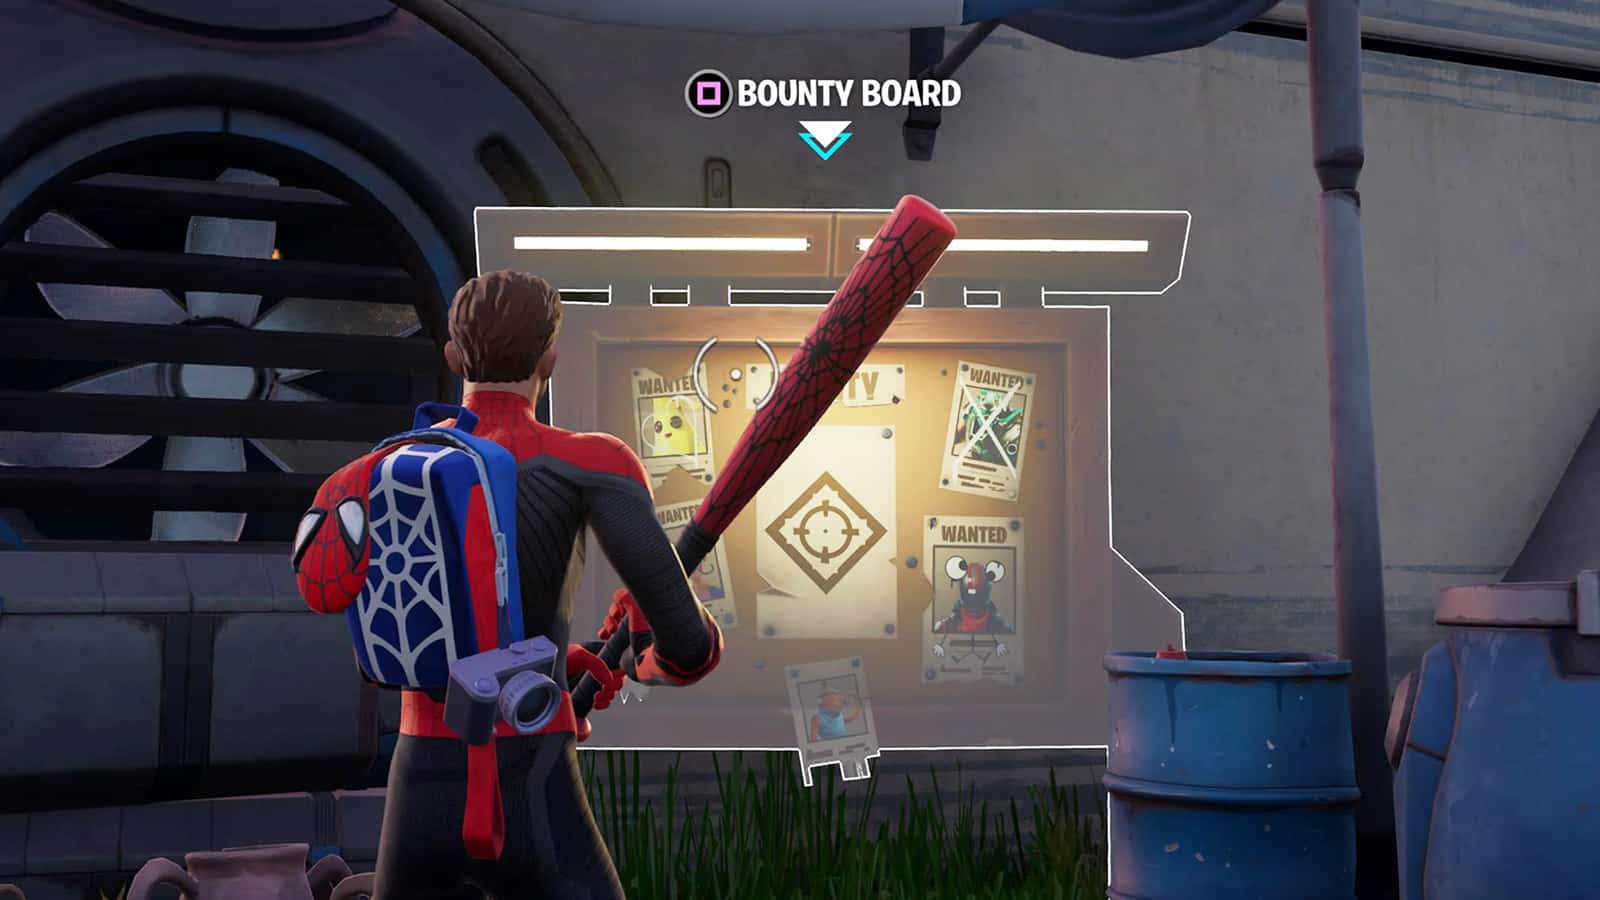 A Fortnite player accepting a Bounty from a Bounty Board